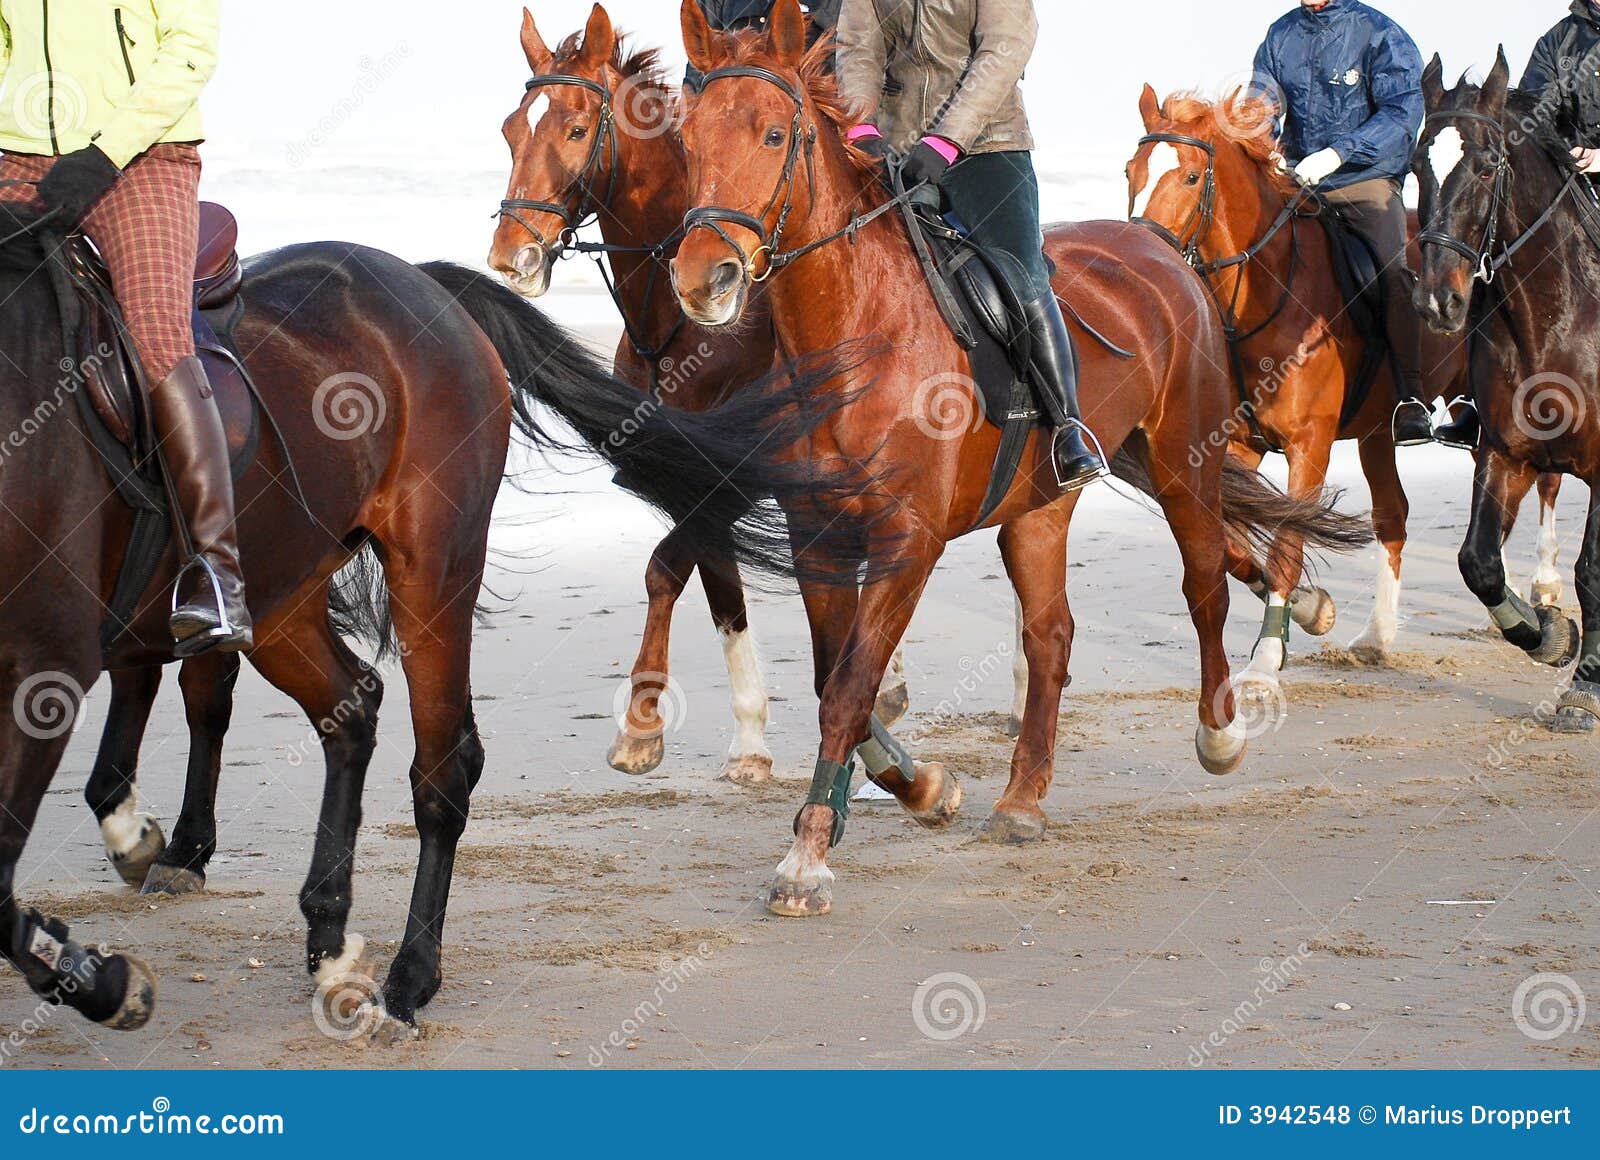 sideview group horseback riding on the beach